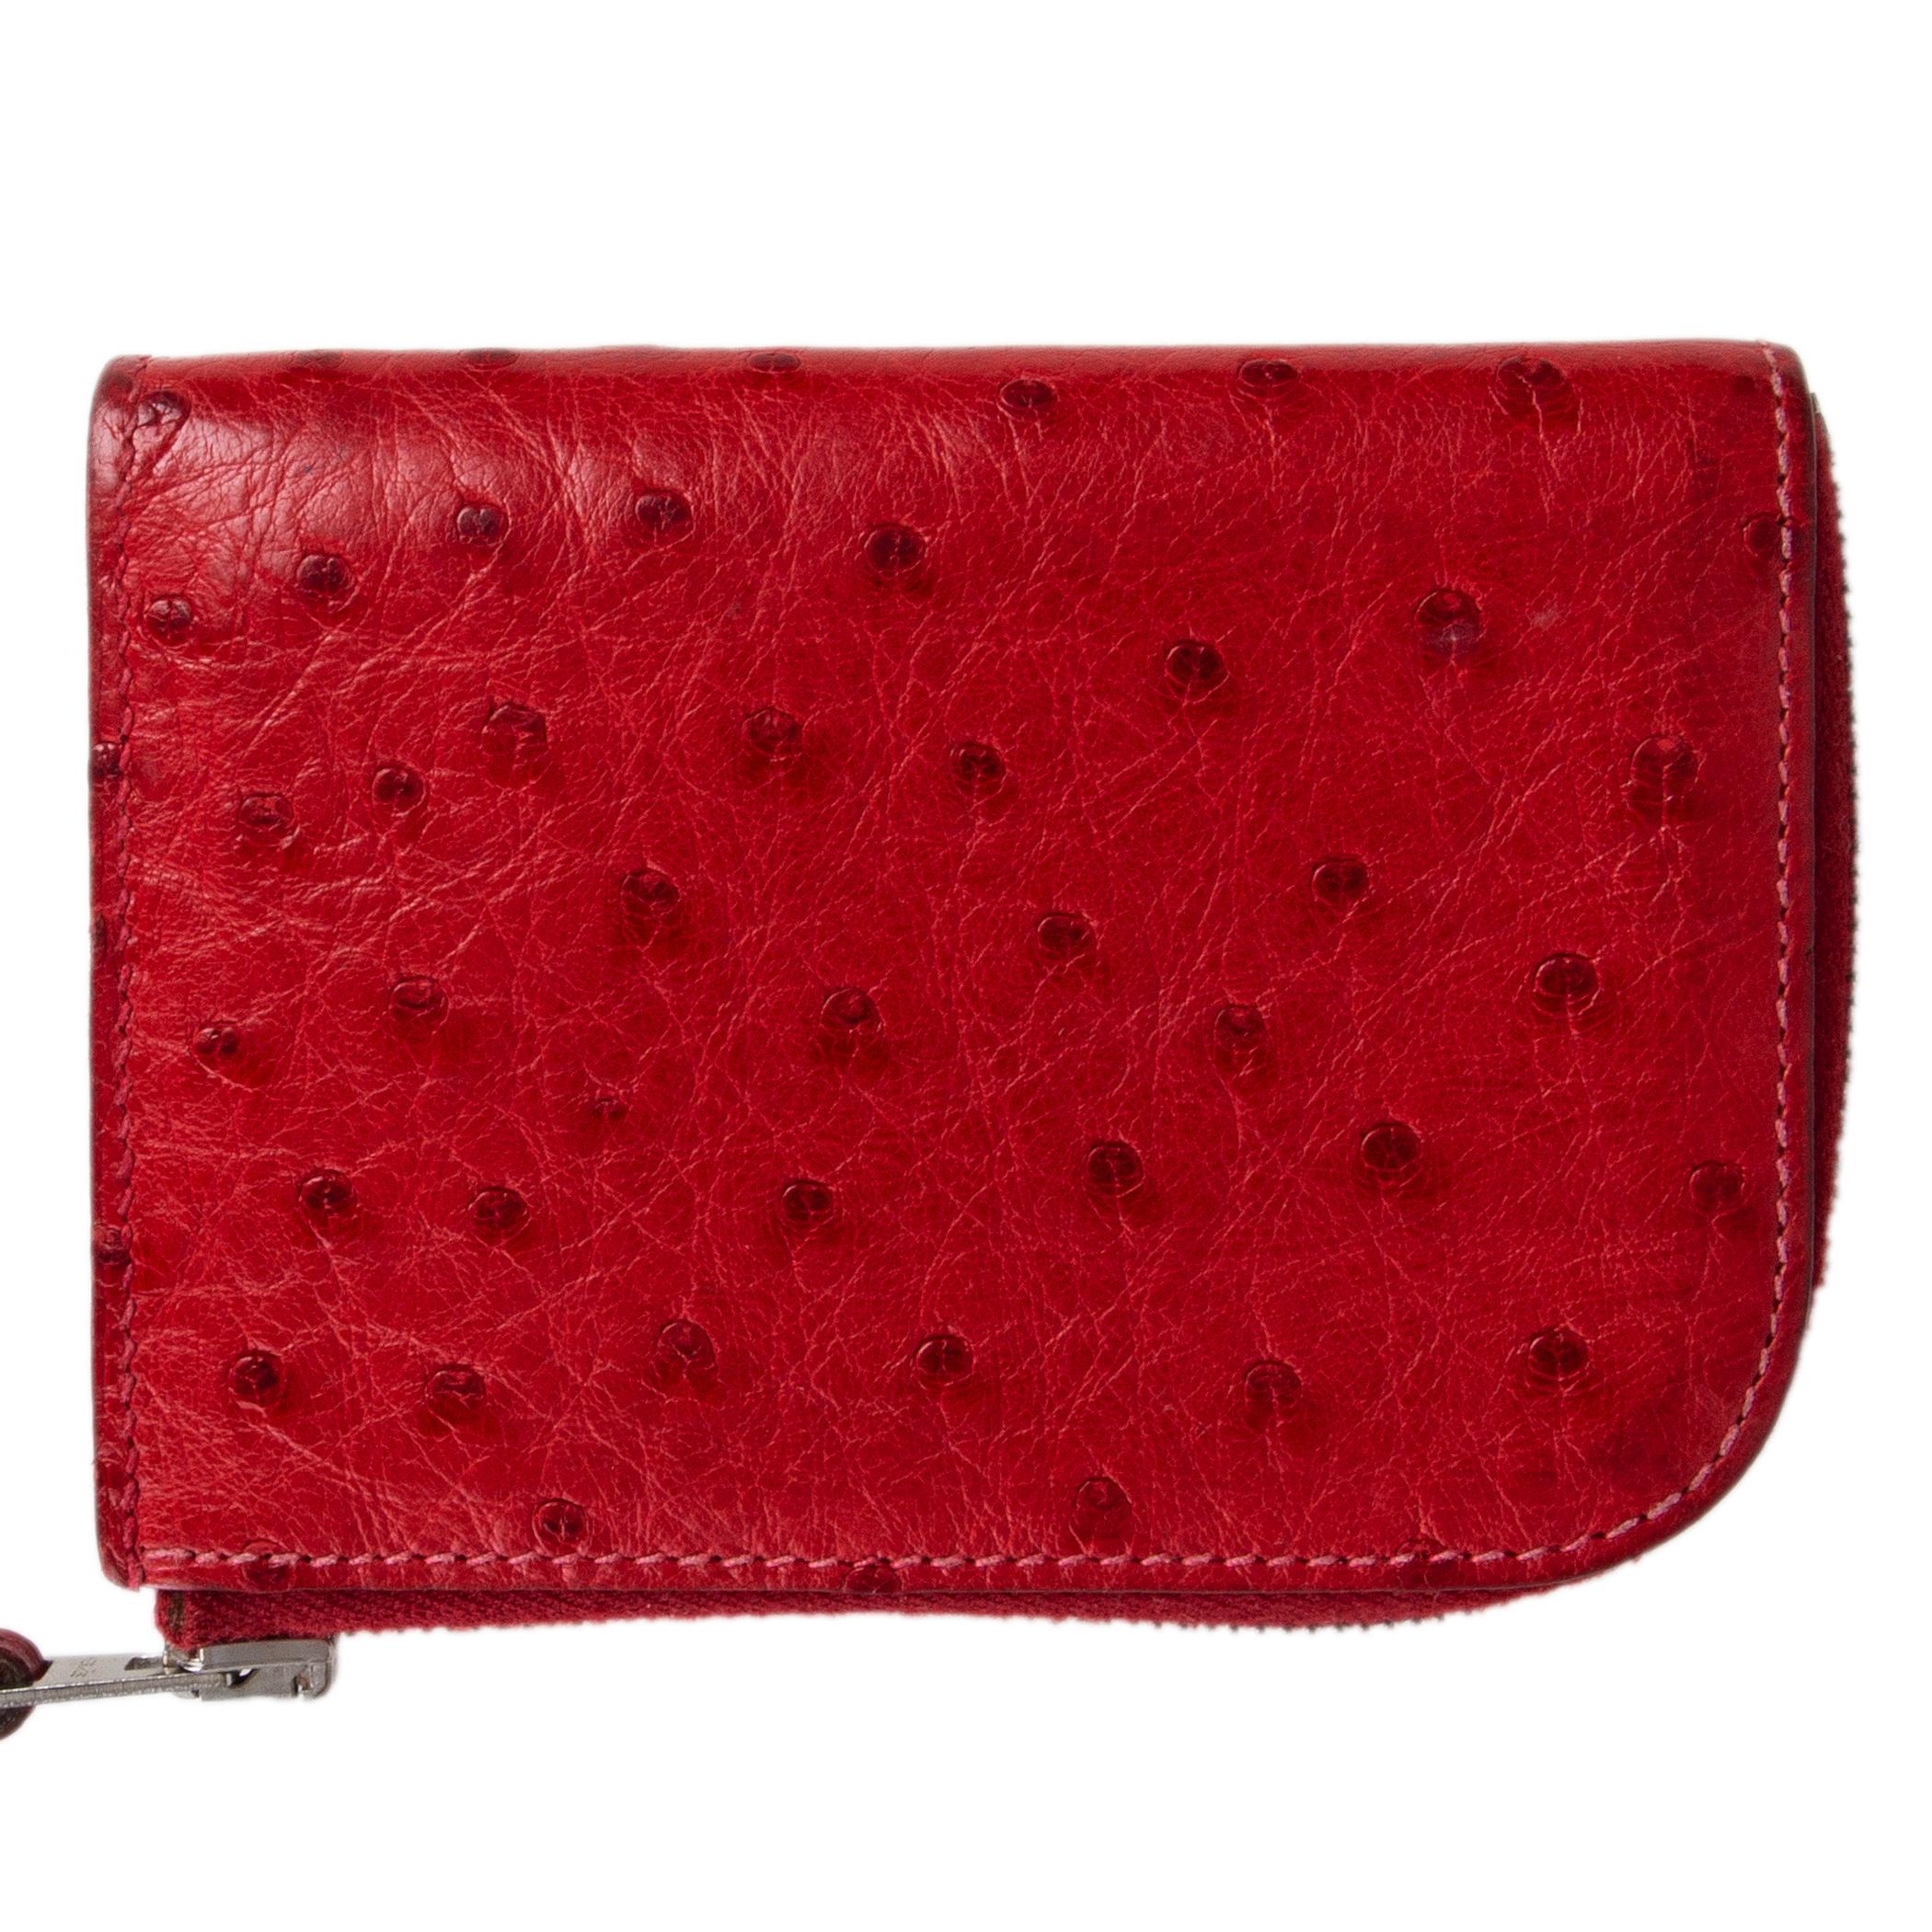 Hermes zip wallet on a strap in Rouge VIF (red) Ostrich leather. Closes with a zip. Lined in Chevre (goat skin) with six credit card slots. Has been carried with some minor patina. Overall in excellent condition.

Width 10cm (3.9in)
Height 7.5cm